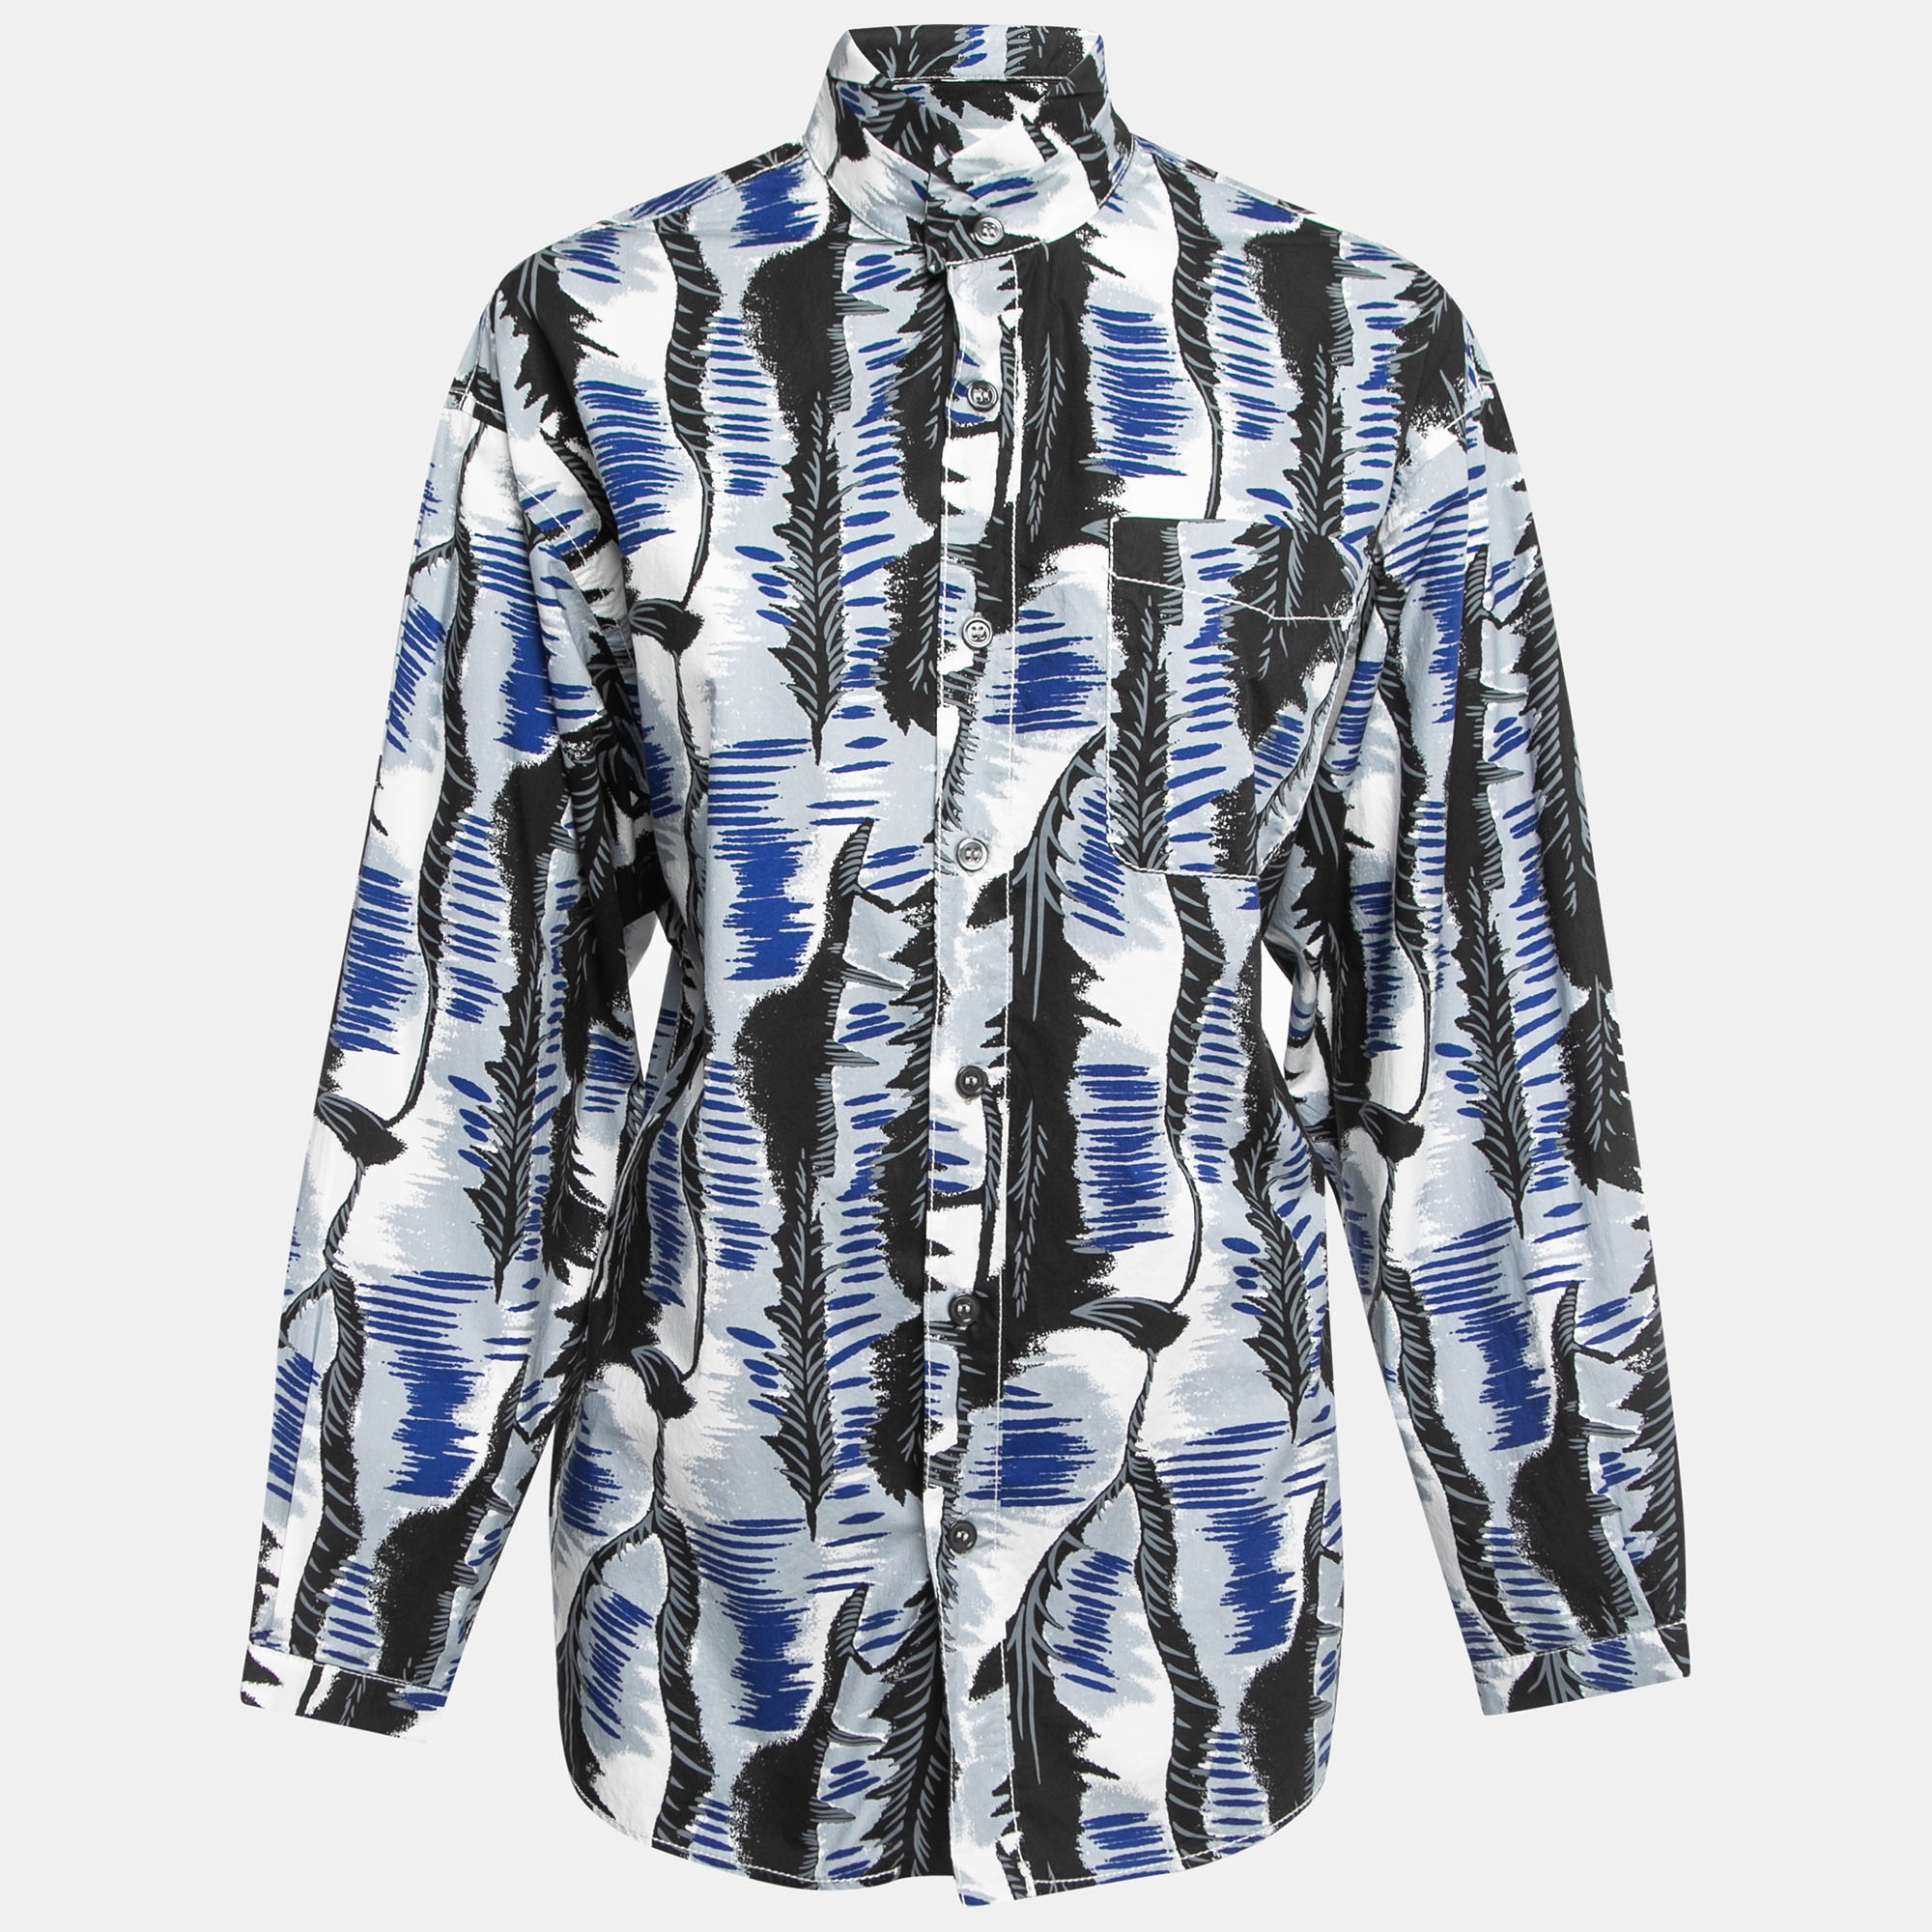 The Marni shirt is a stylish and versatile piece. Made from soft cotton fabric it features a unique blue and black print. The shirt has a button front closure and full sleeves providing a relaxed and oversized fit. Its a perfect addition to any fashion forward wardrobe.